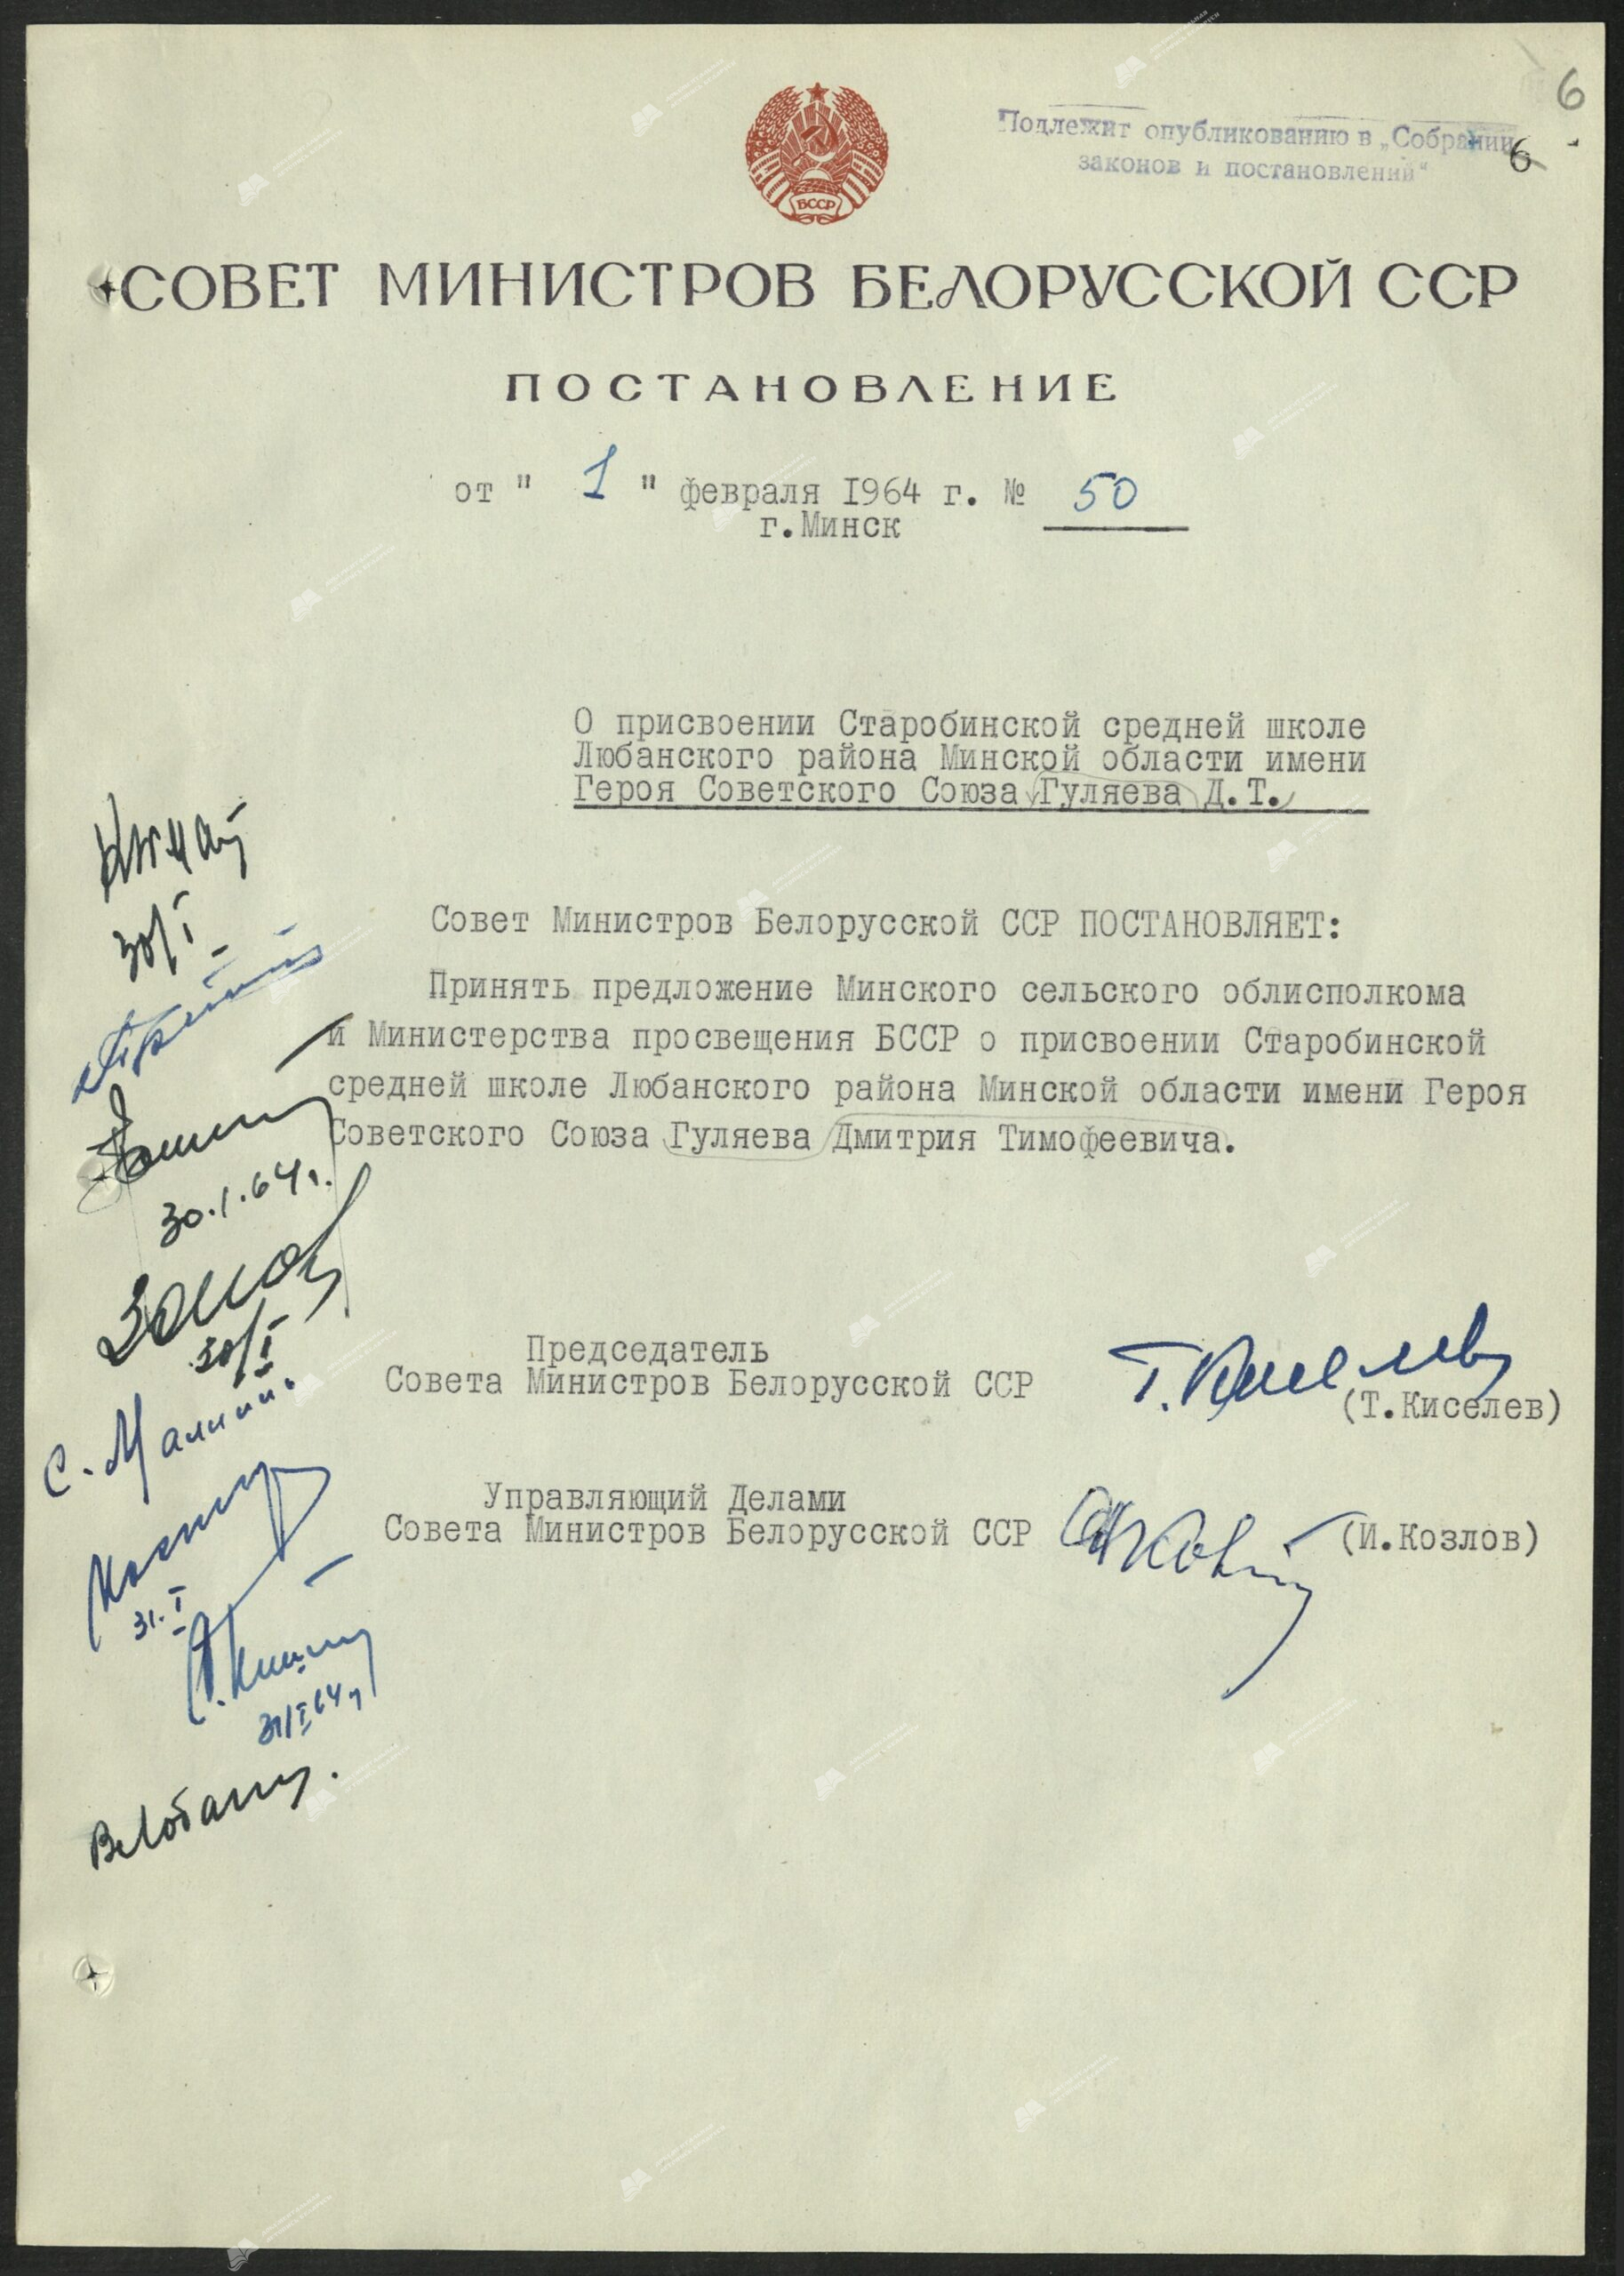 Resolution No. 50 of the Council of Ministers of the BSSR «On naming the Starobinskaya secondary school of the Lyuban district of the Minsk region after the Hero of the Soviet Union D. T. Gulyaev»-стр. 0